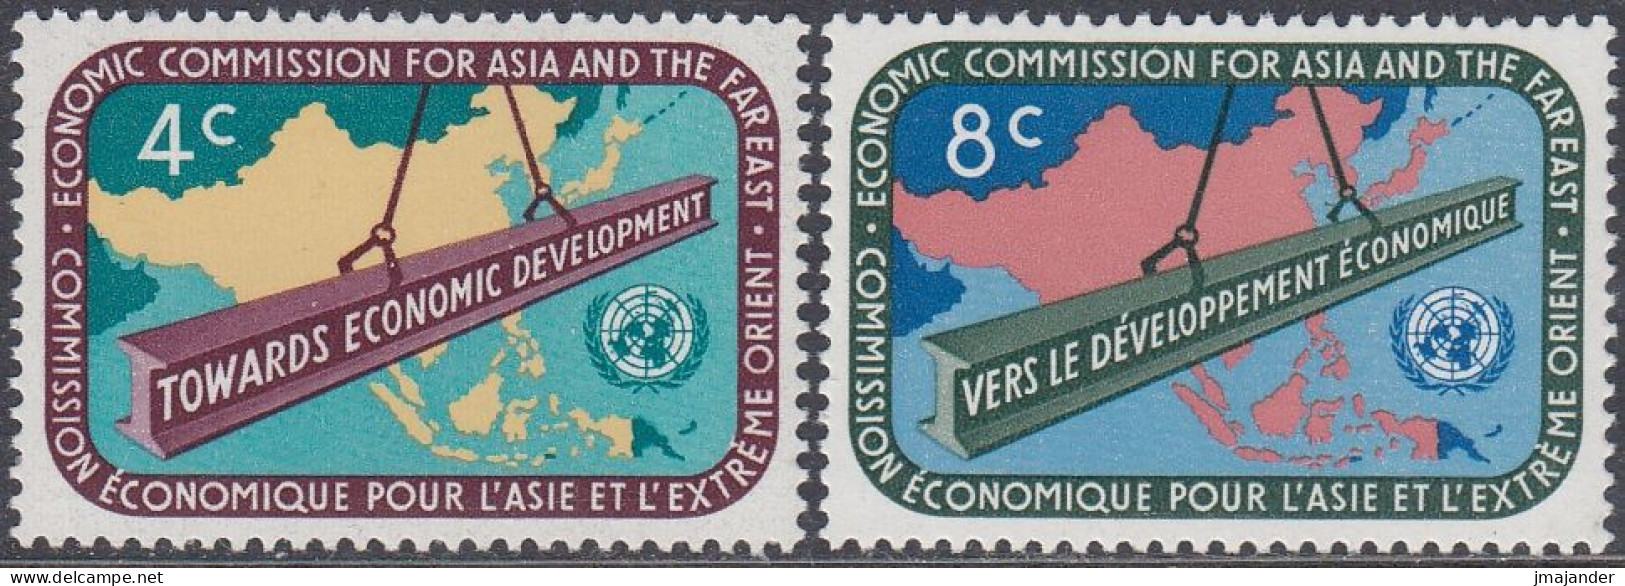 UN New York 1960 - U.N. Economic Commission For Asia And The Far East Or "ECAFE" - Mi 86-87 ** MNH - Neufs